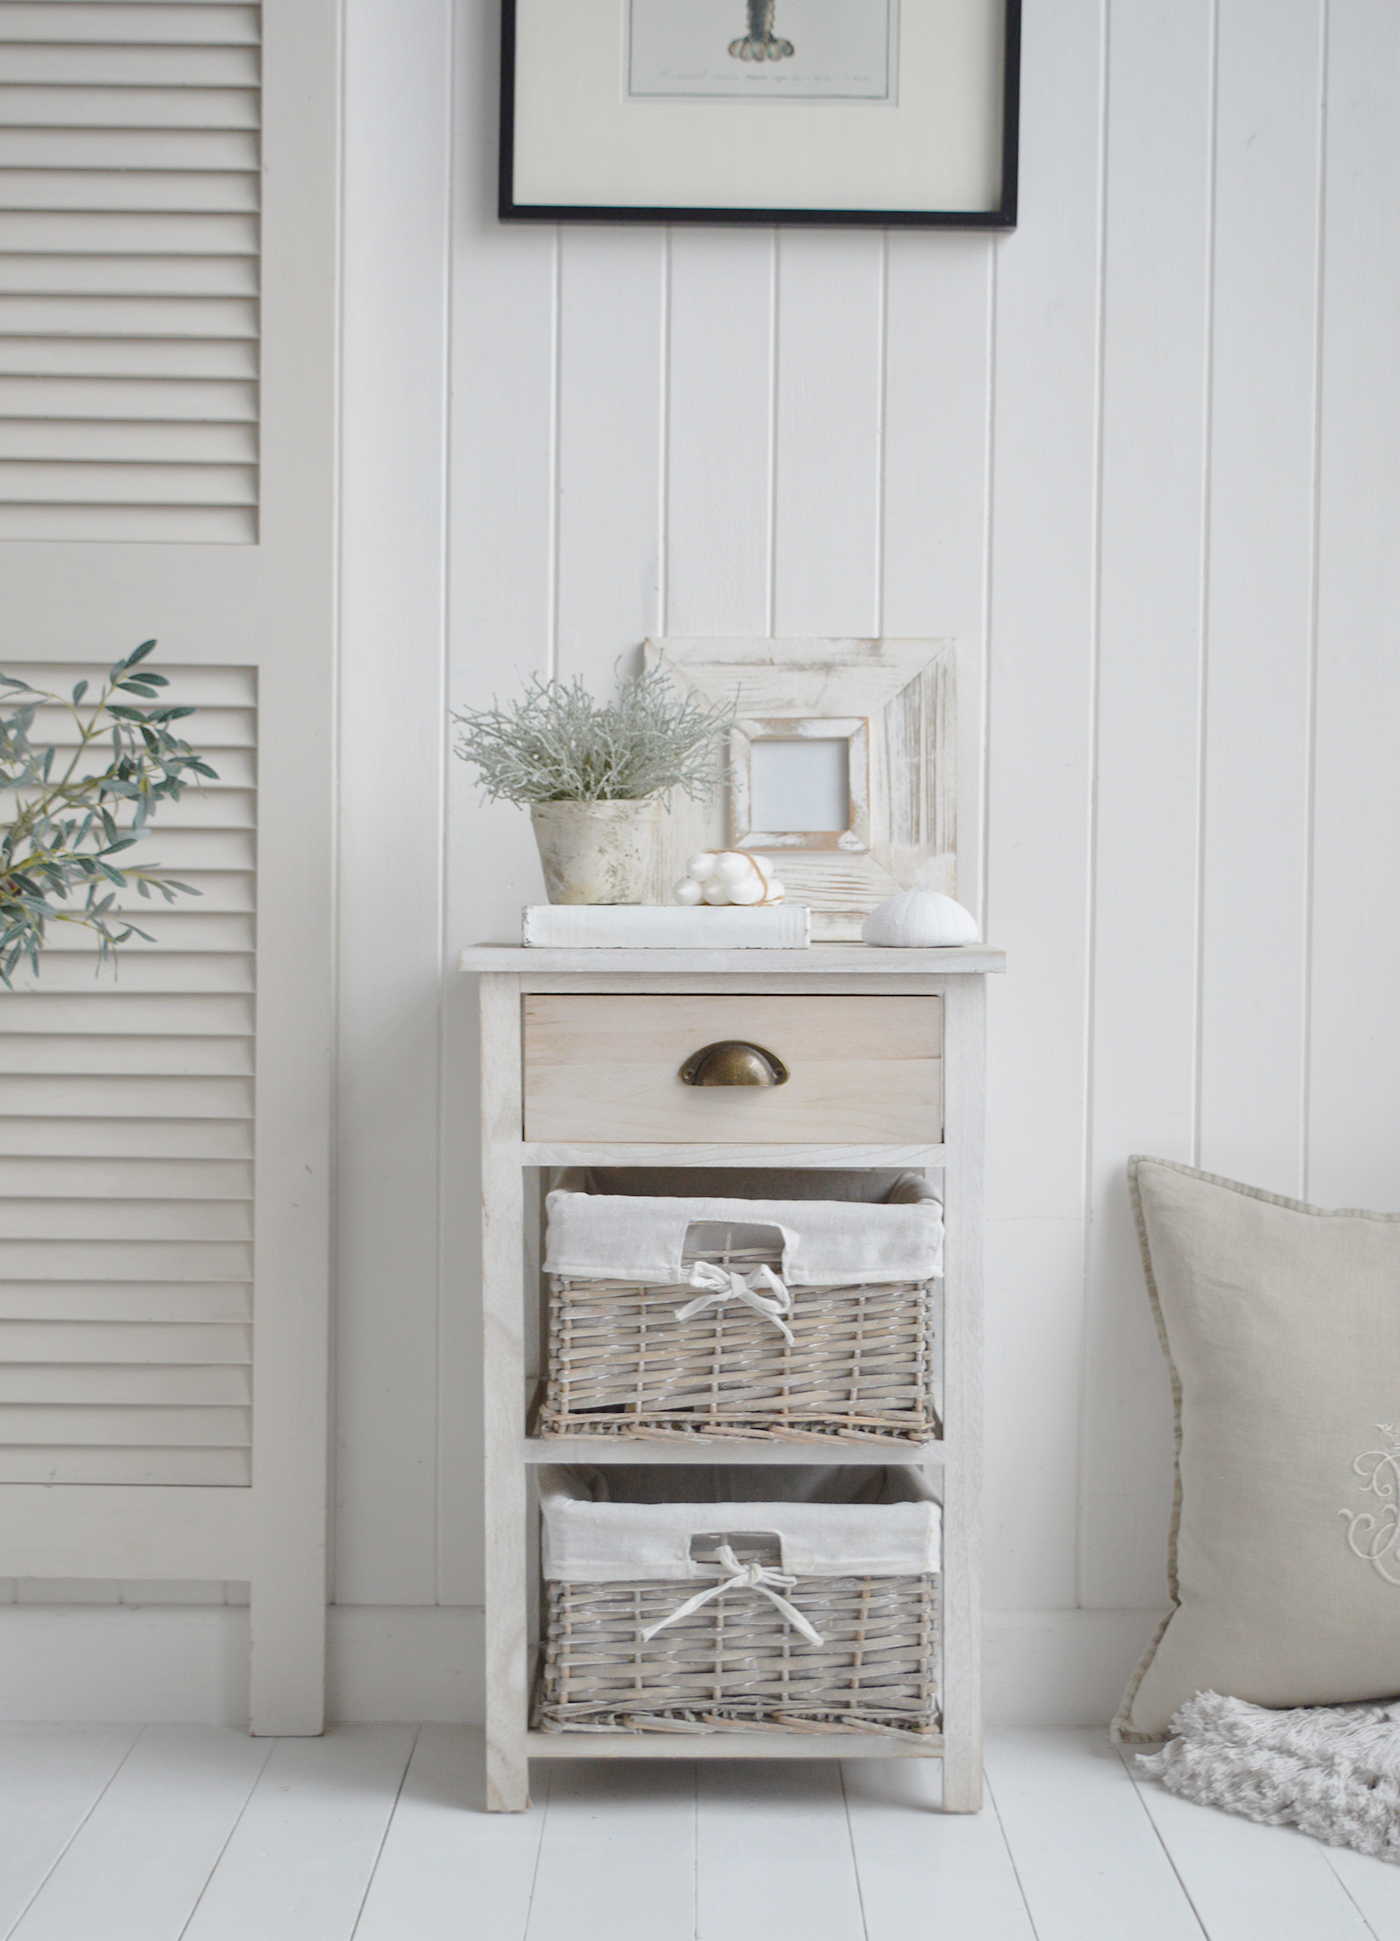 Dorset Cabinet with 3 Drawers in light grey washed wood - New England Coastal and Modern Country Furniture. Storage furniture with baskets, ideal in the living room as a lamp table